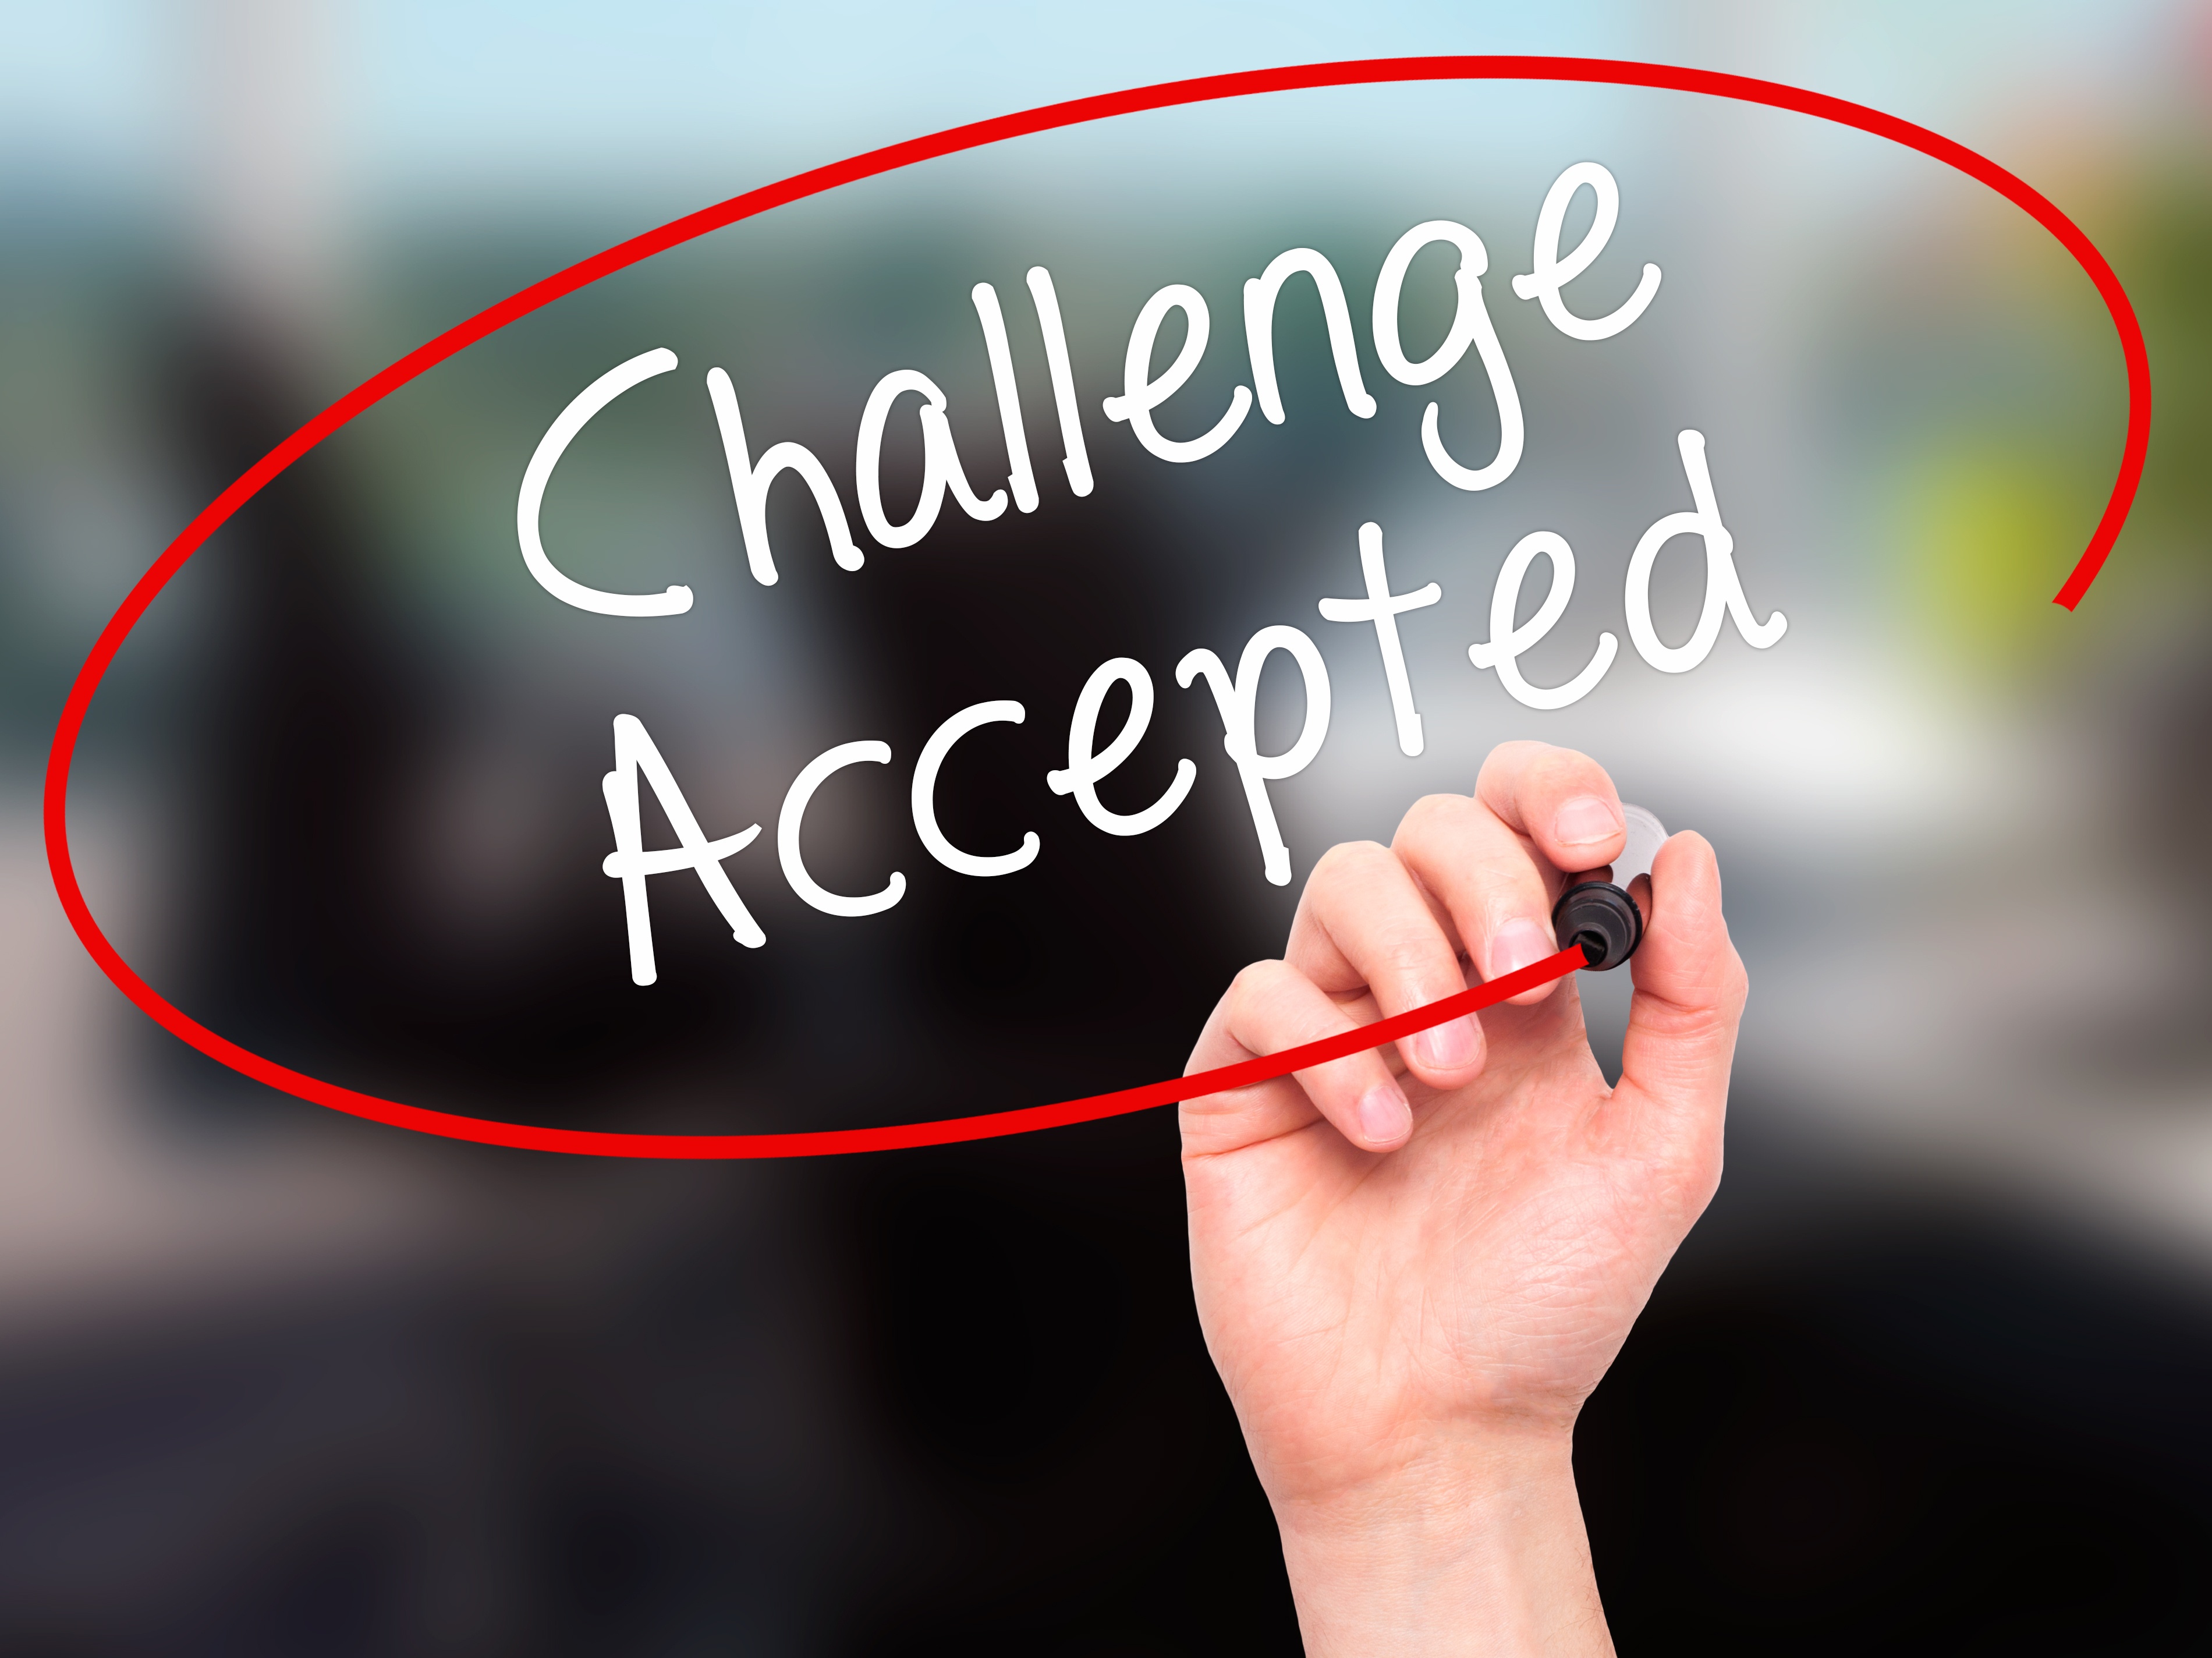 3 Challenges Related to Healthcare Facility Equipment Planning